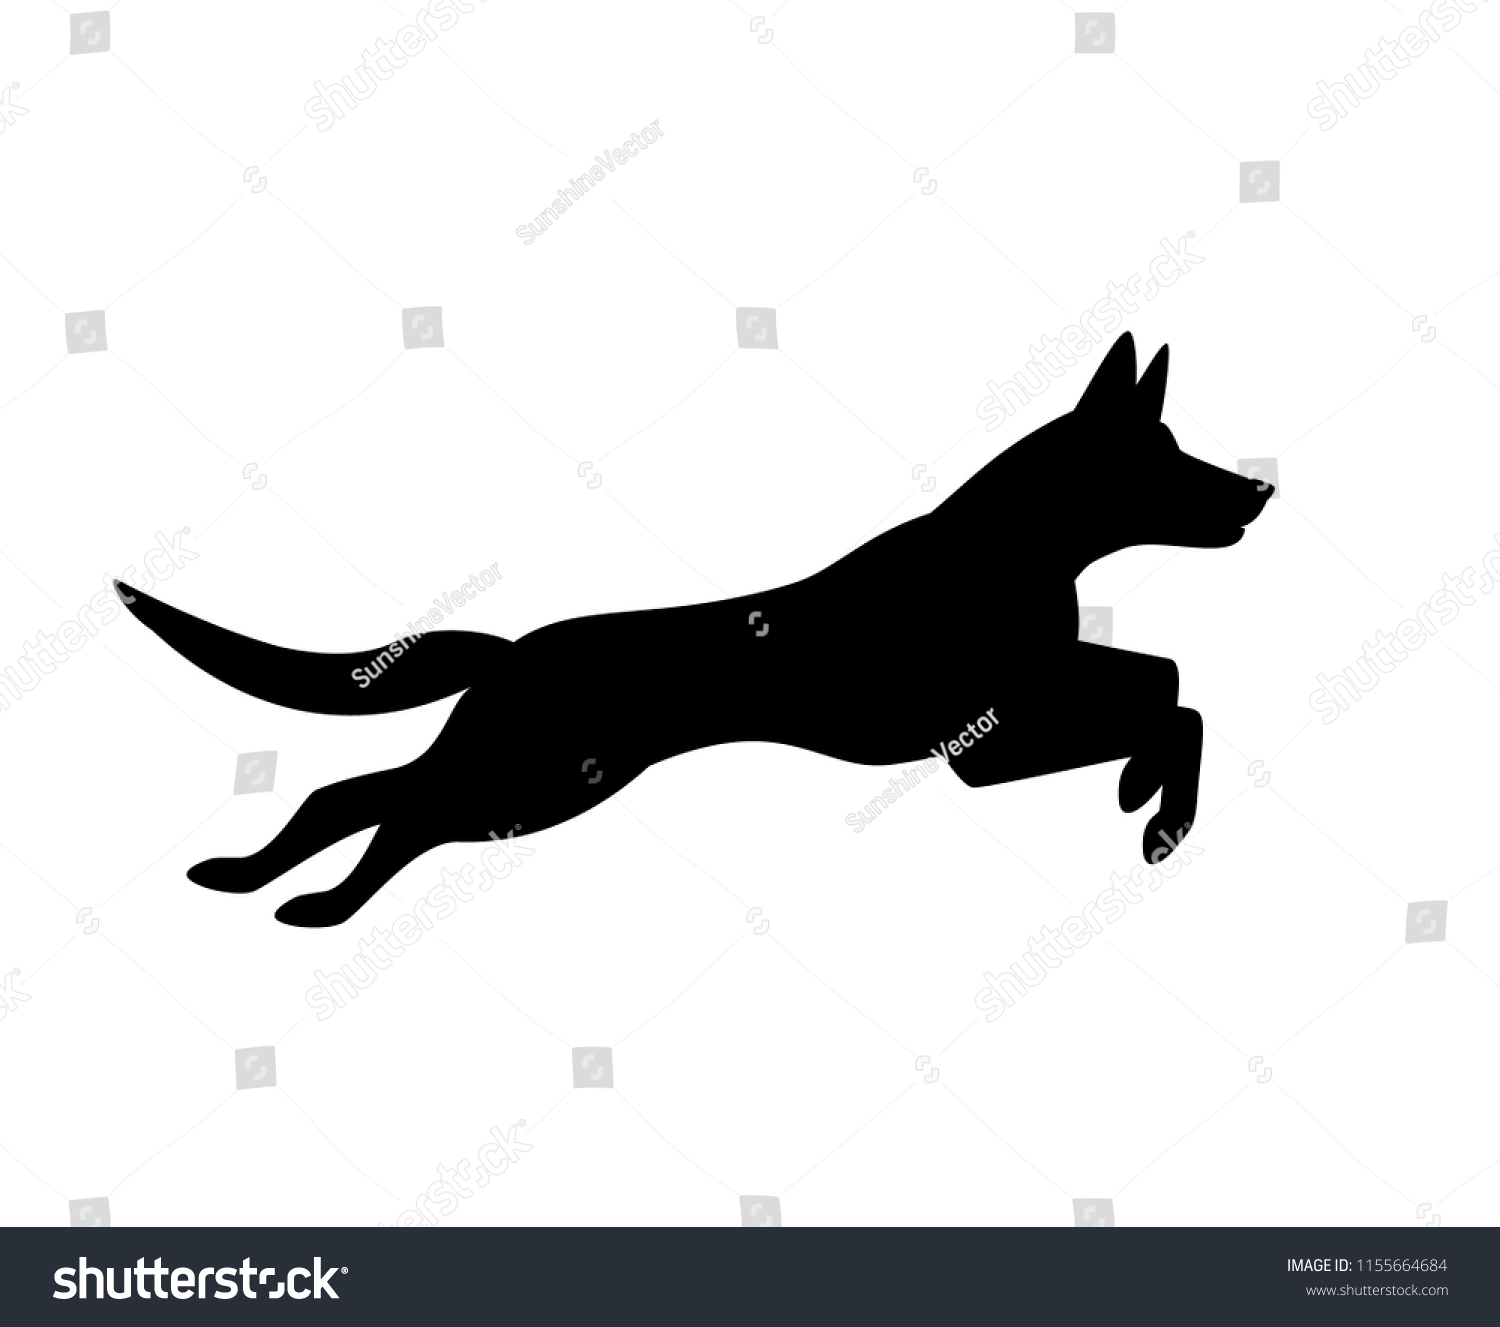 SVG of belgian malinois dog jumping running silhouette graphic svg